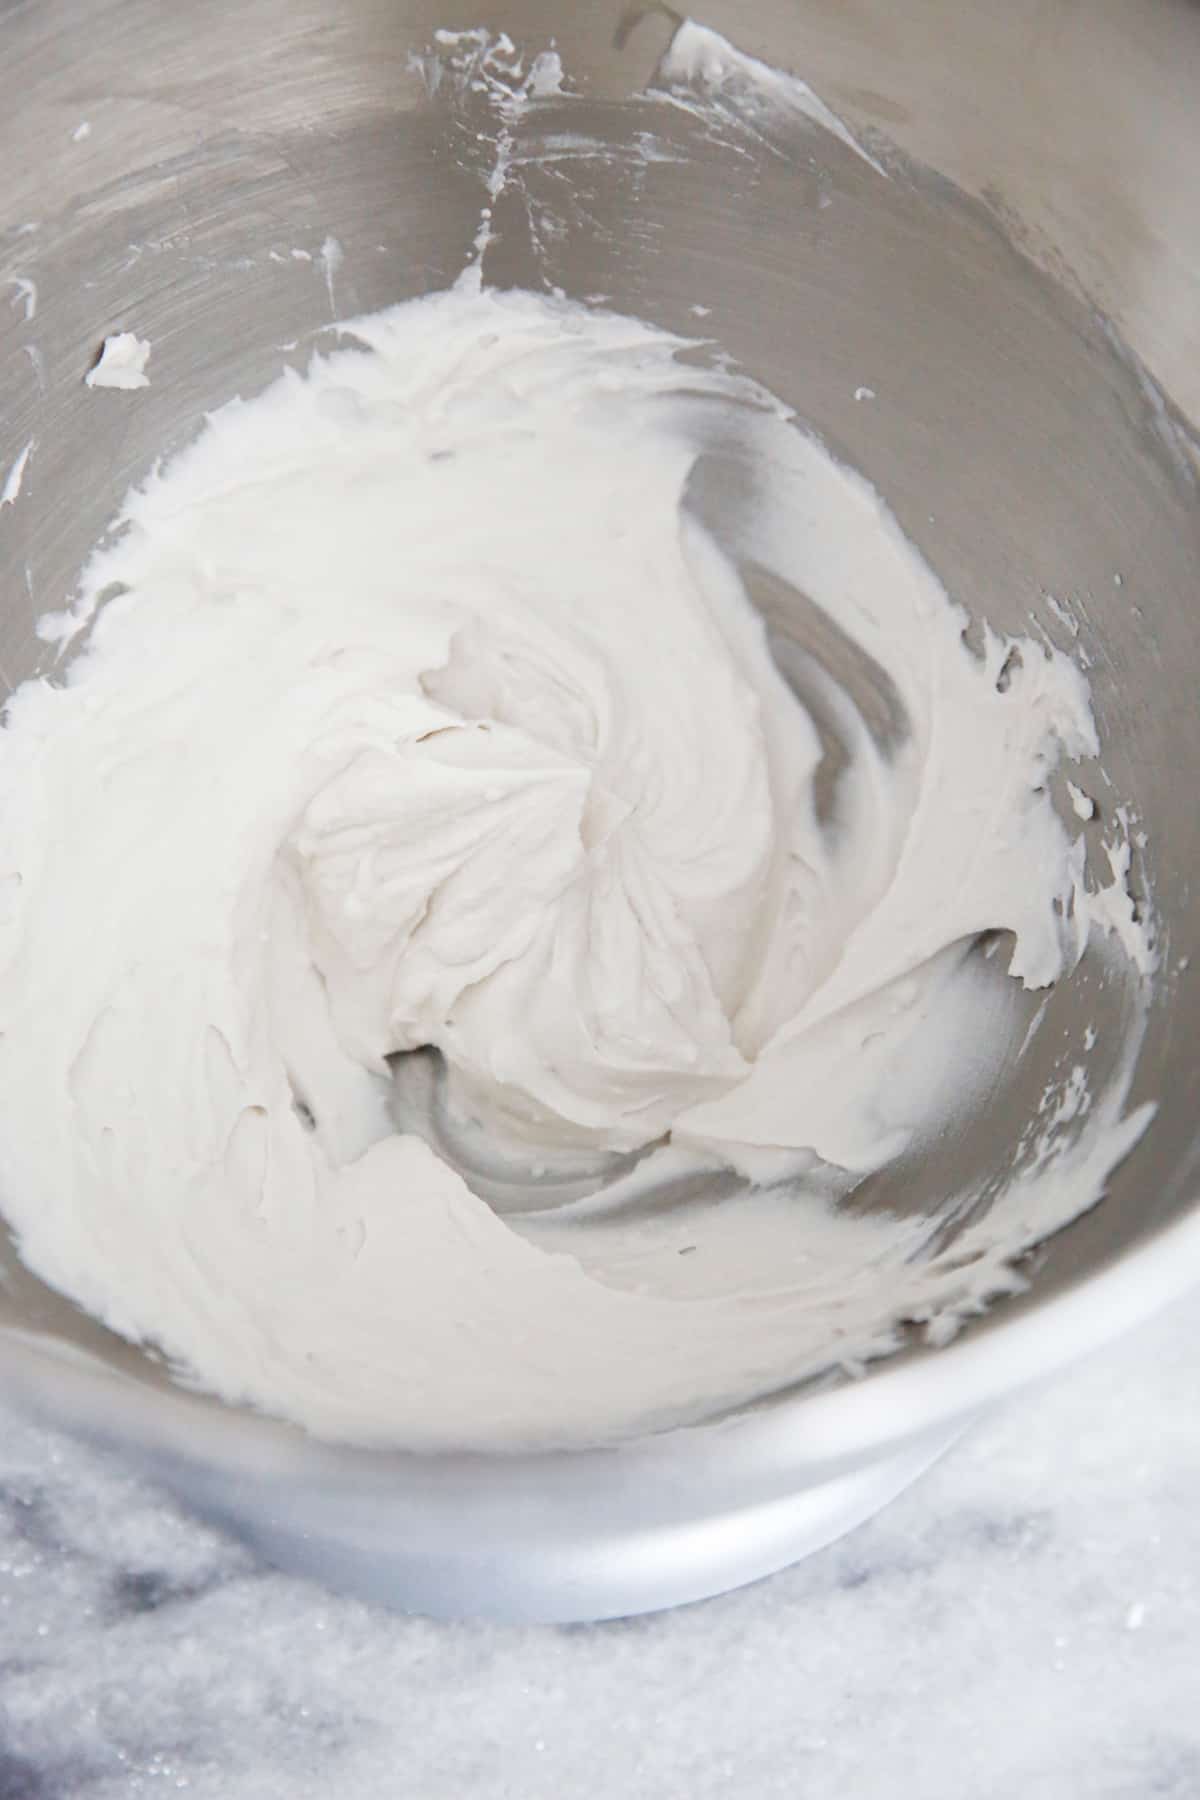 Coconut Whipped Cream in a bowl